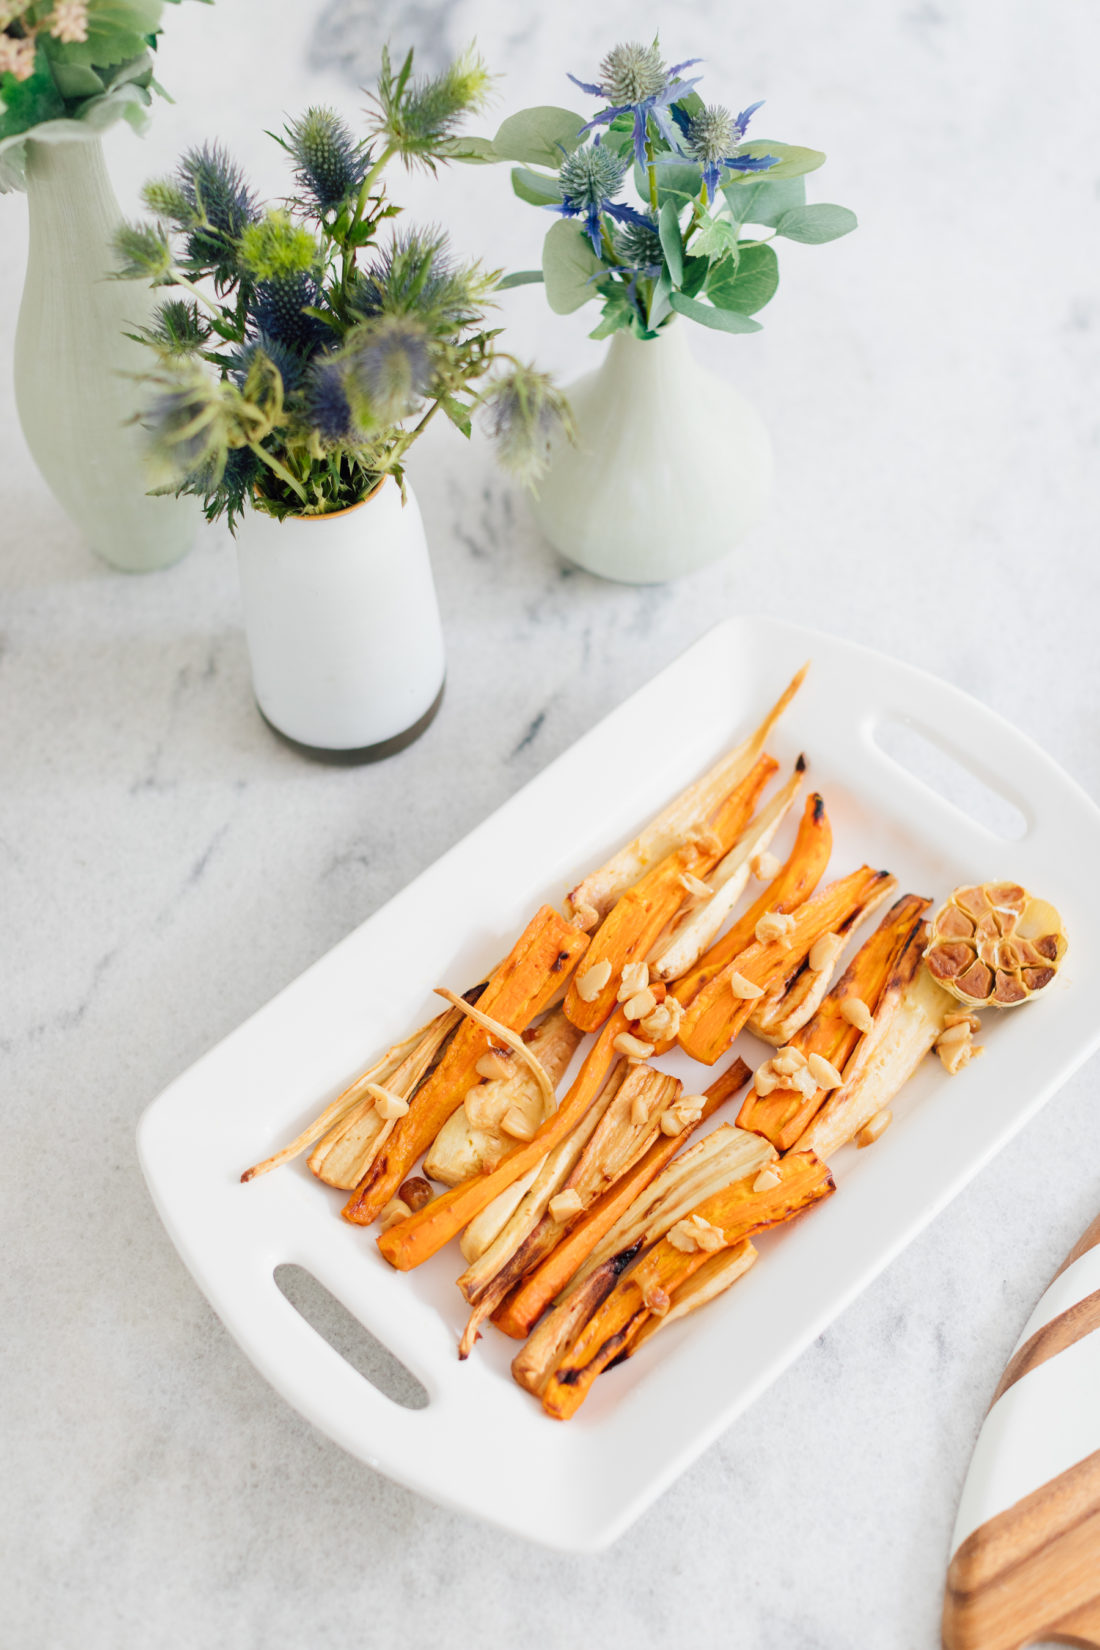 Eva Amurri Martino's Parsnips & Carrots with Pickled Currant Vinaigrette is a great Thanksgiving side dish recipe